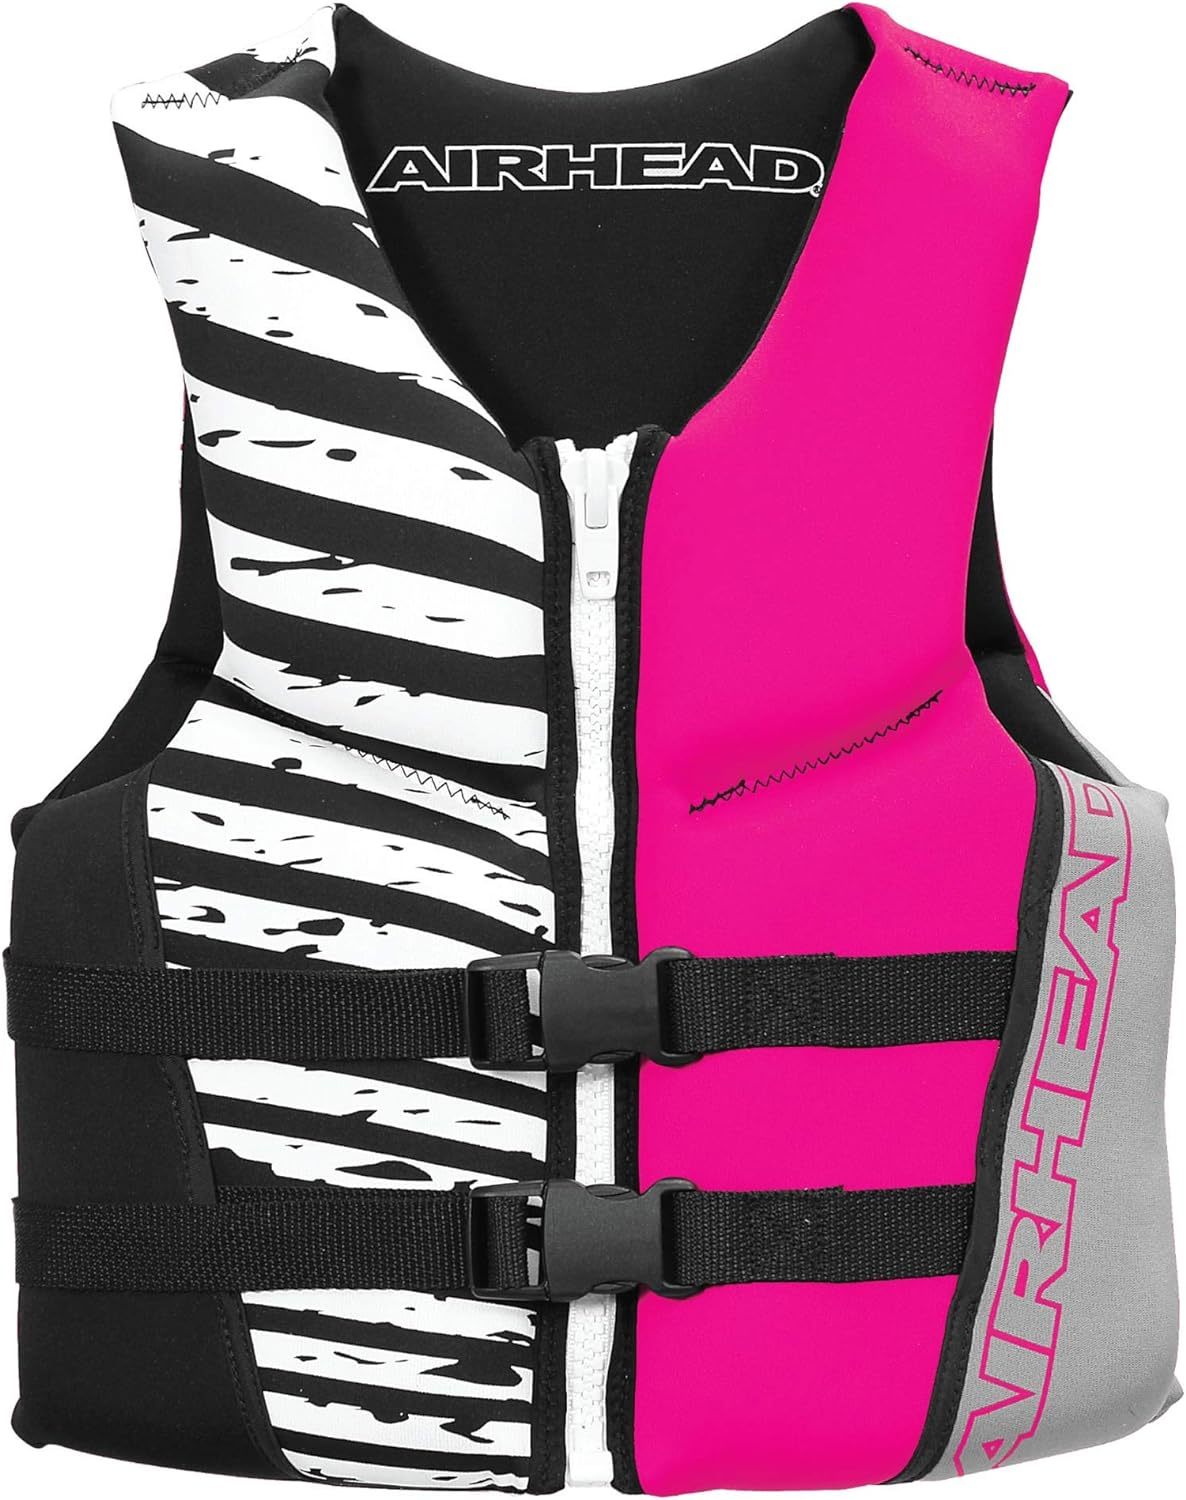 Youth And Women'S Sizes Of The Airhead Wicked Kwik-Dry Neolite Flex Life Jacket - $73.95